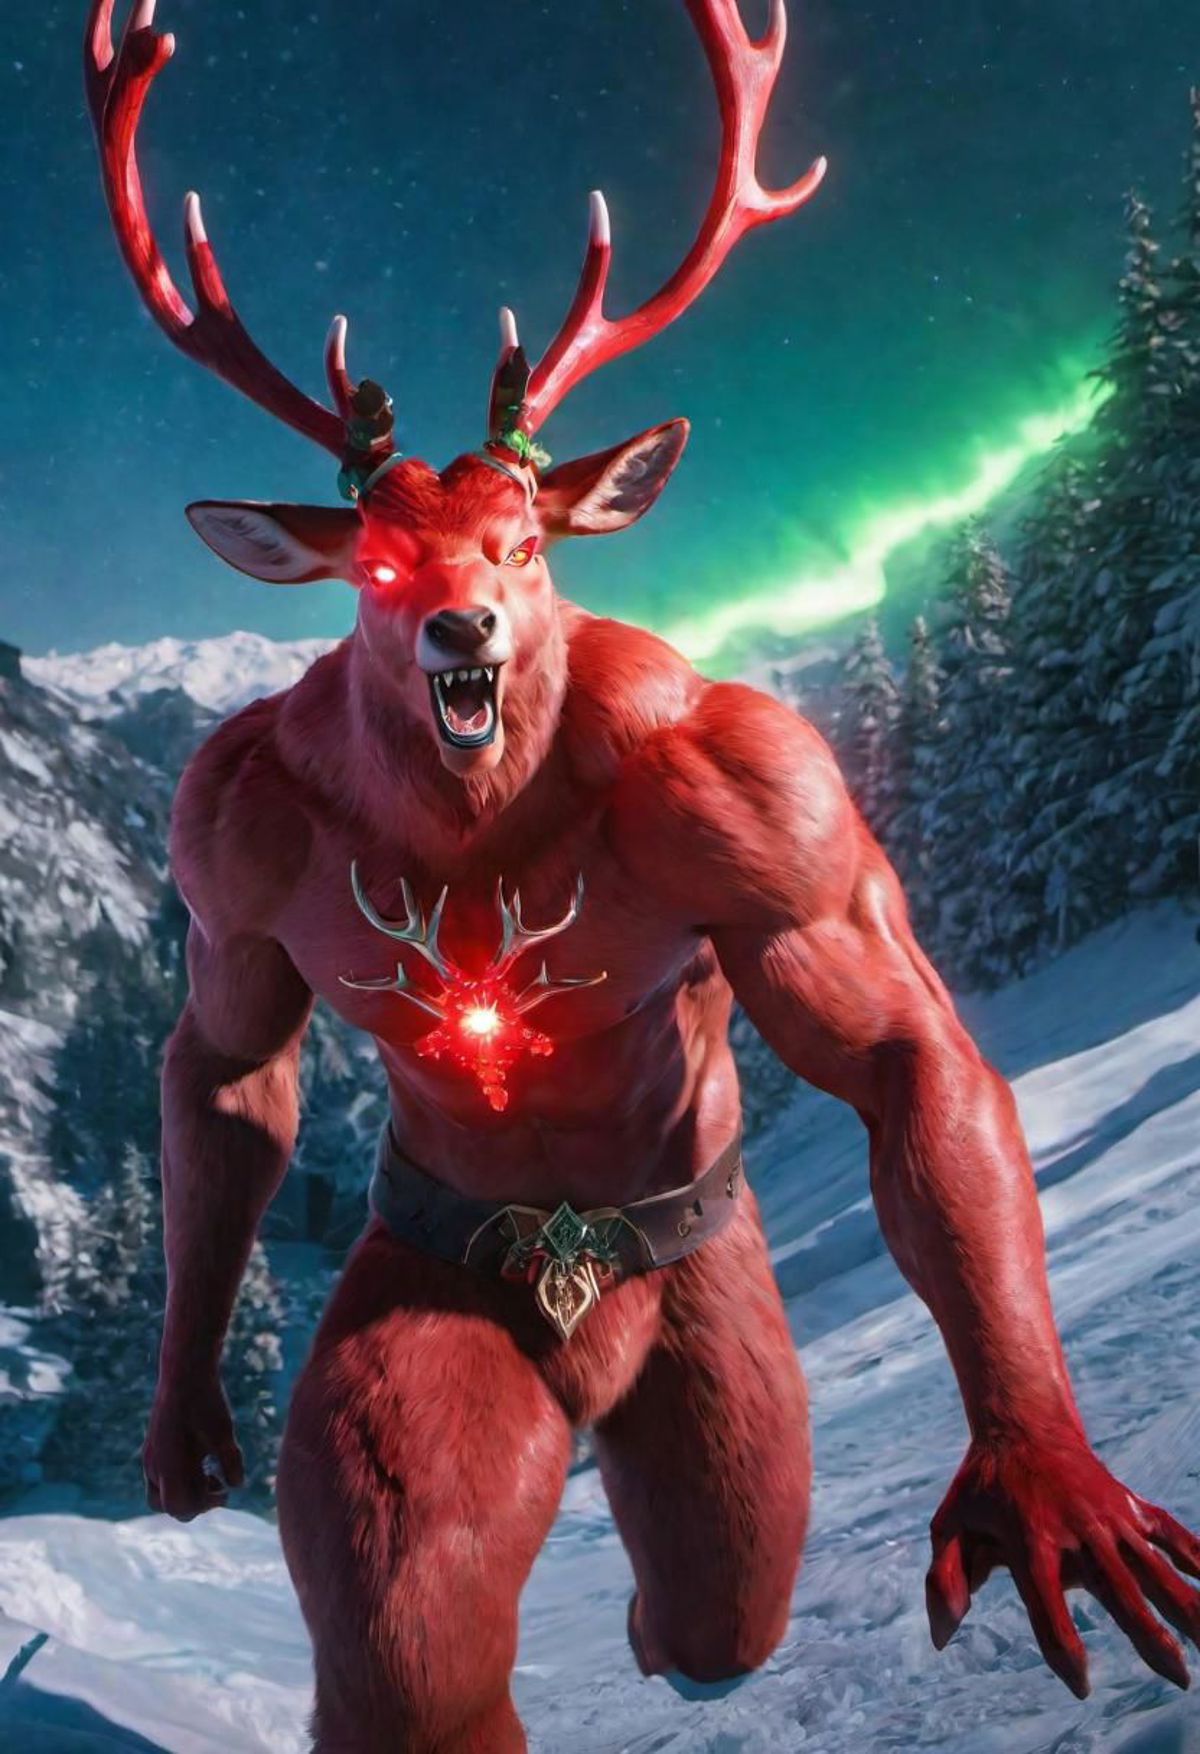 A cartoonish image of a red deer with glowing eyes and antlers, wearing a belt and standing on a snowy mountain.